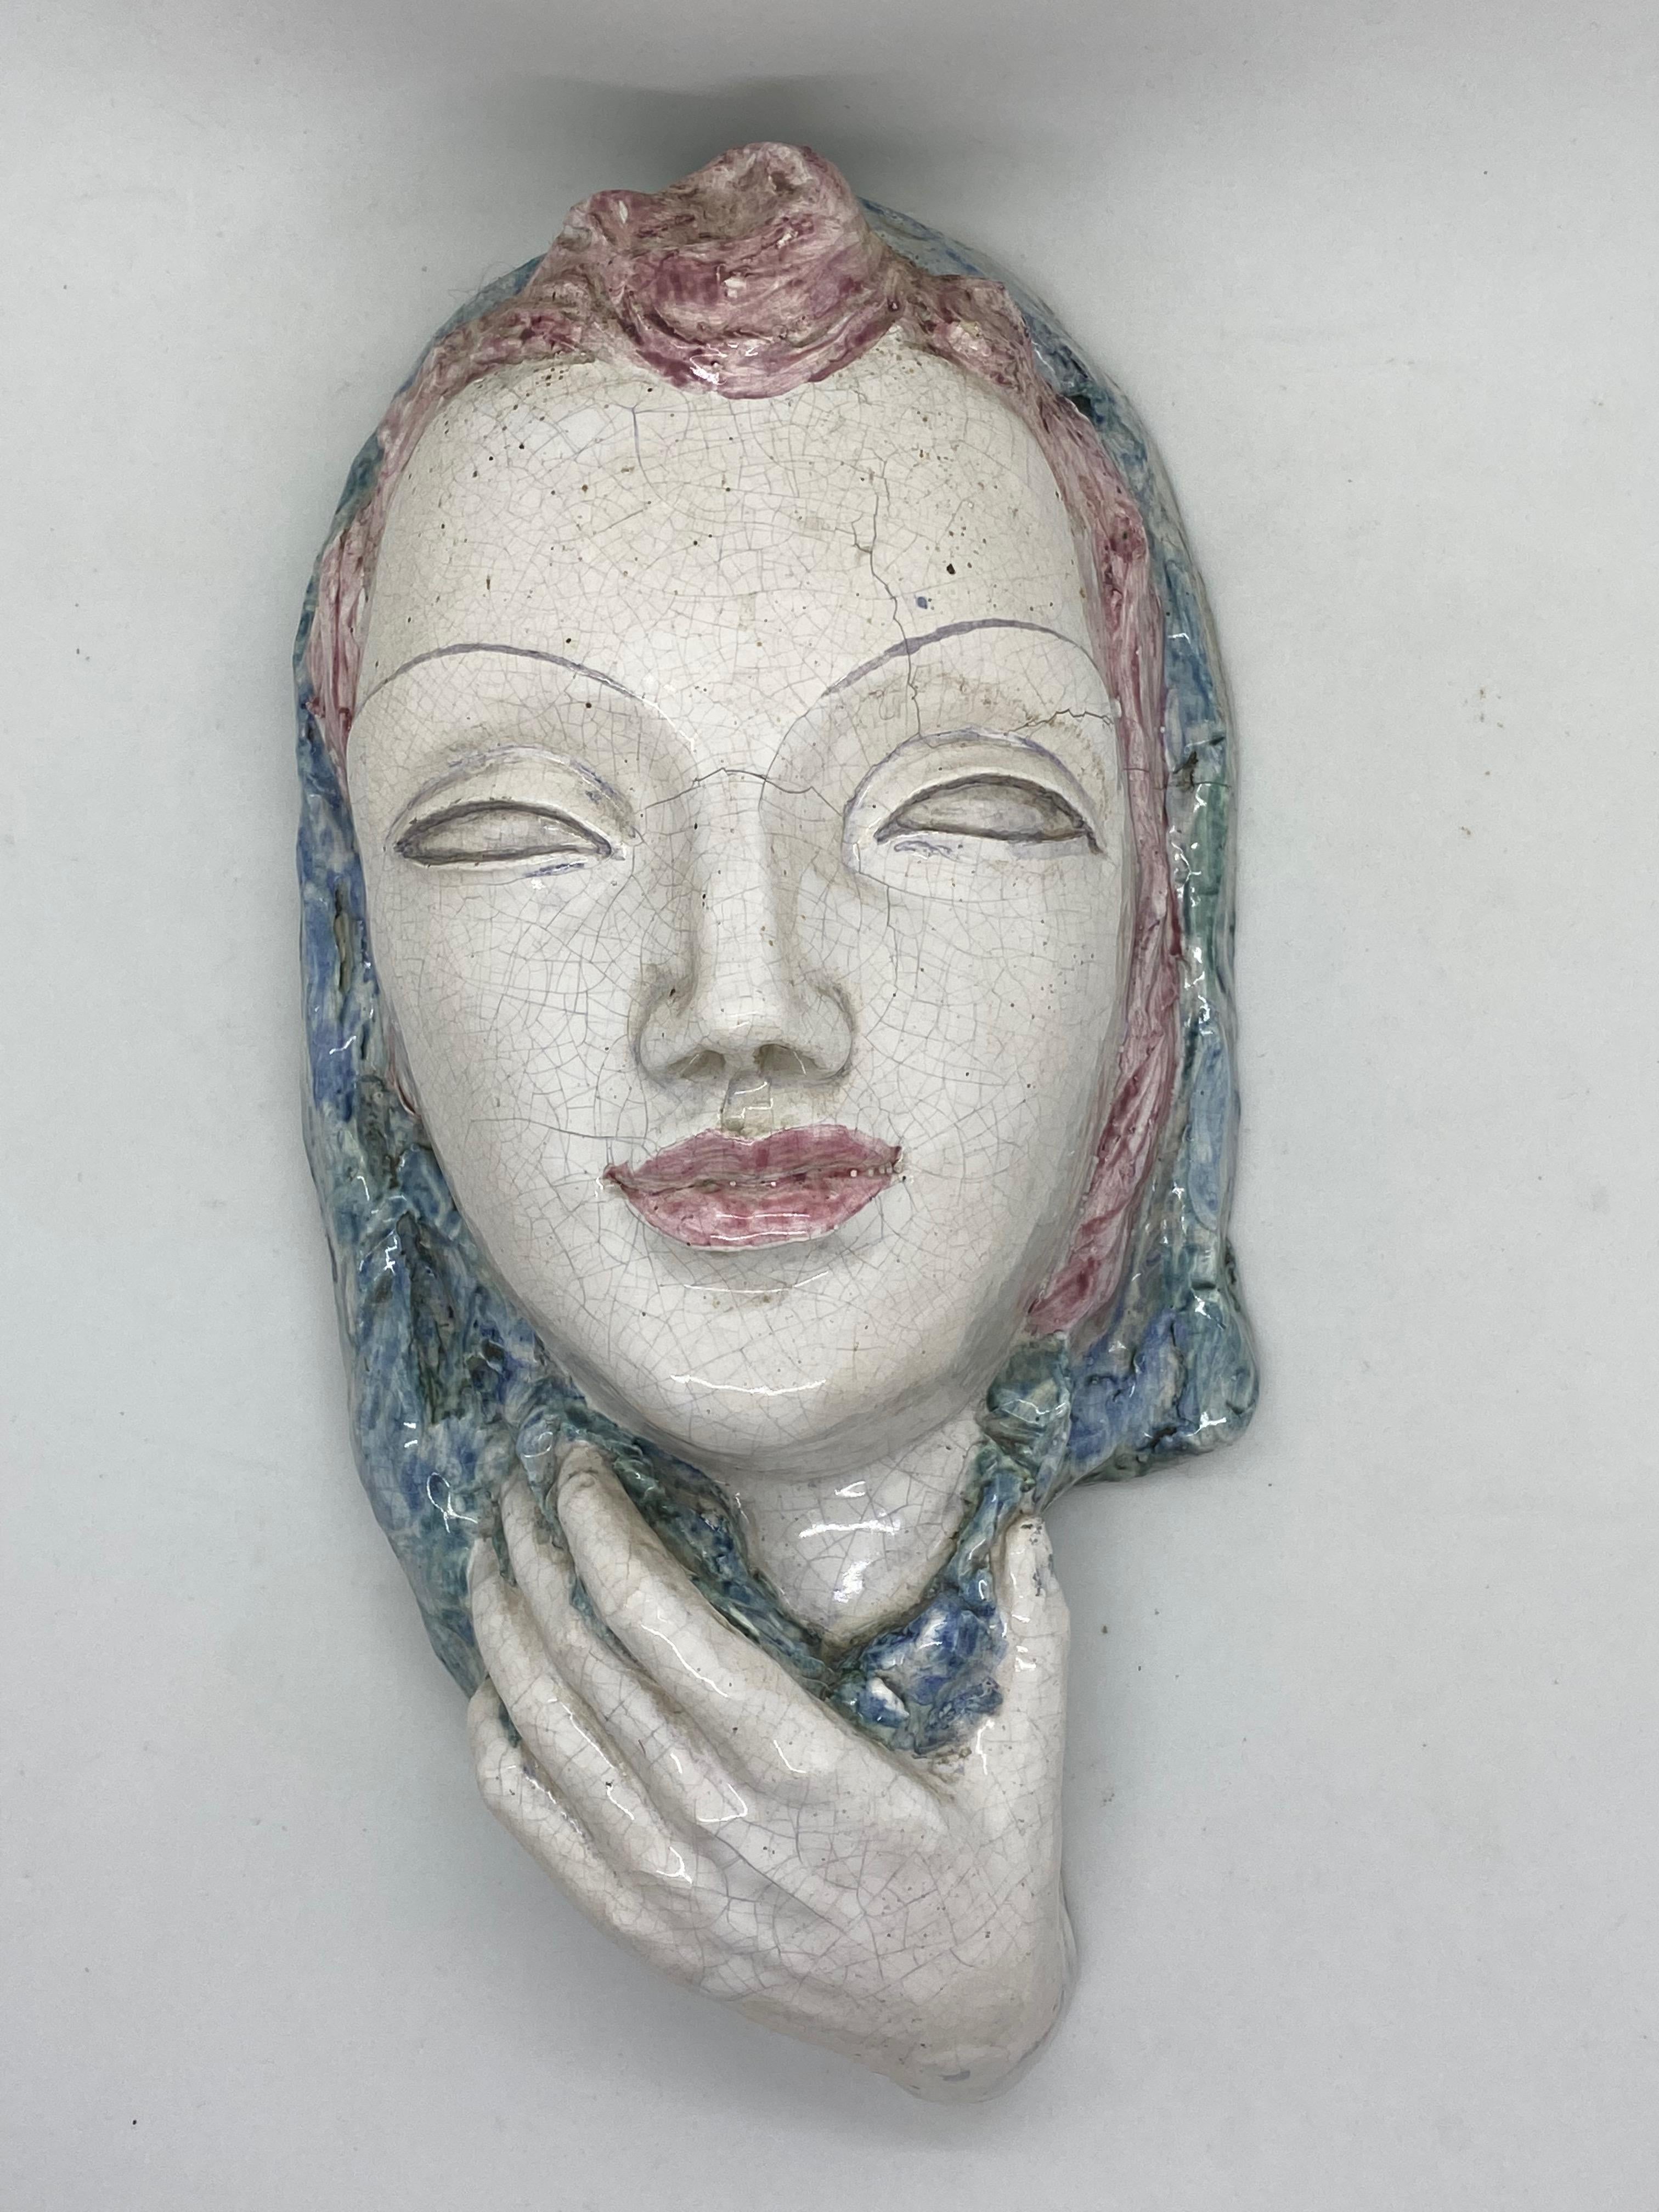 A beautiful vintage ceramic glazed wall mask of a female. It’s in the style of Vally Wieselthier. It would make a beautiful decoration on each wall. Made in the 1920s it displays the joy of that great era with a bold, yet classy statement.